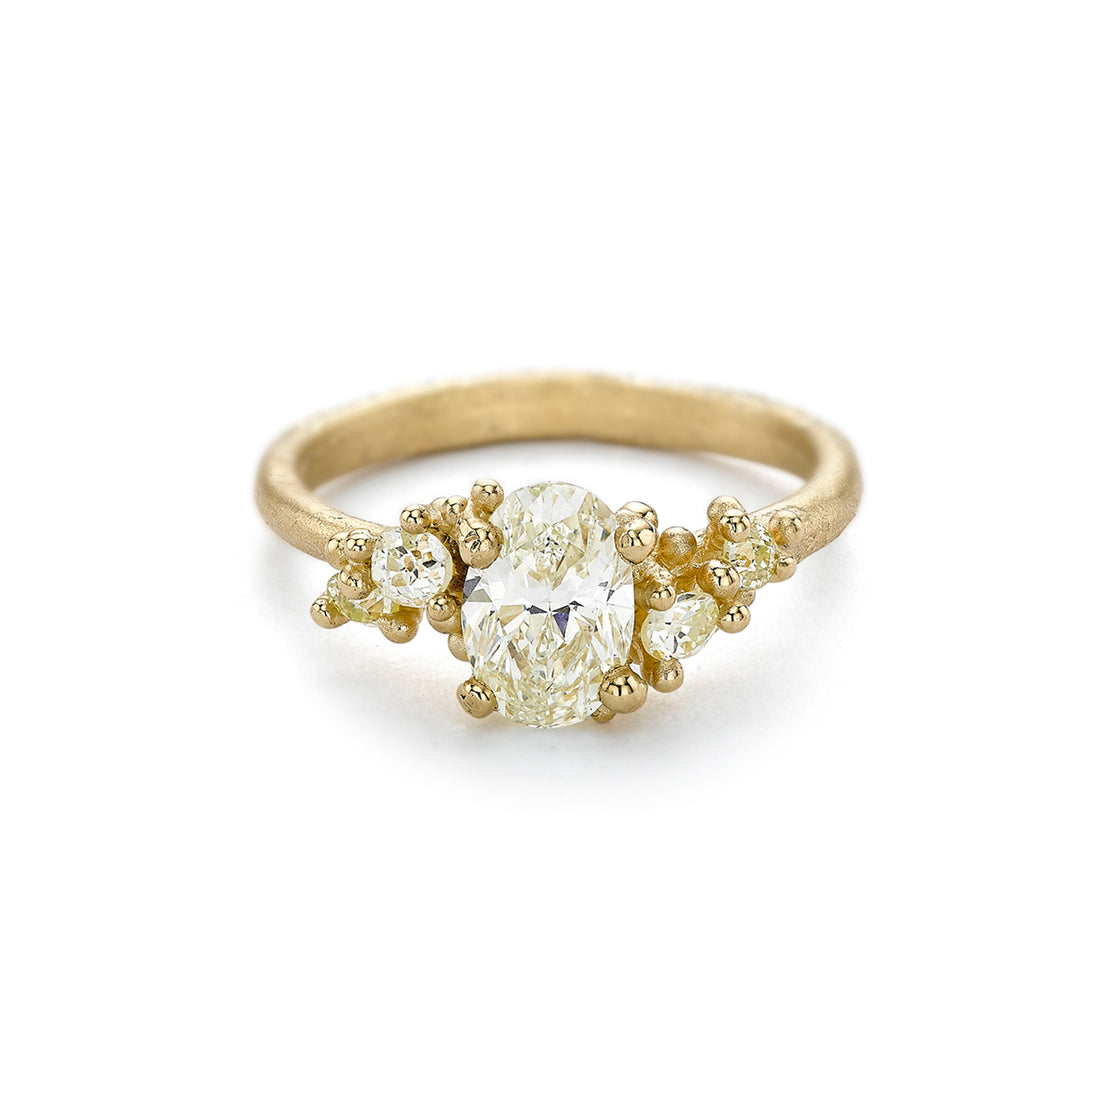  Yellow Diamond Encrusted Ring by Ruth Tomlinson | The Cut London